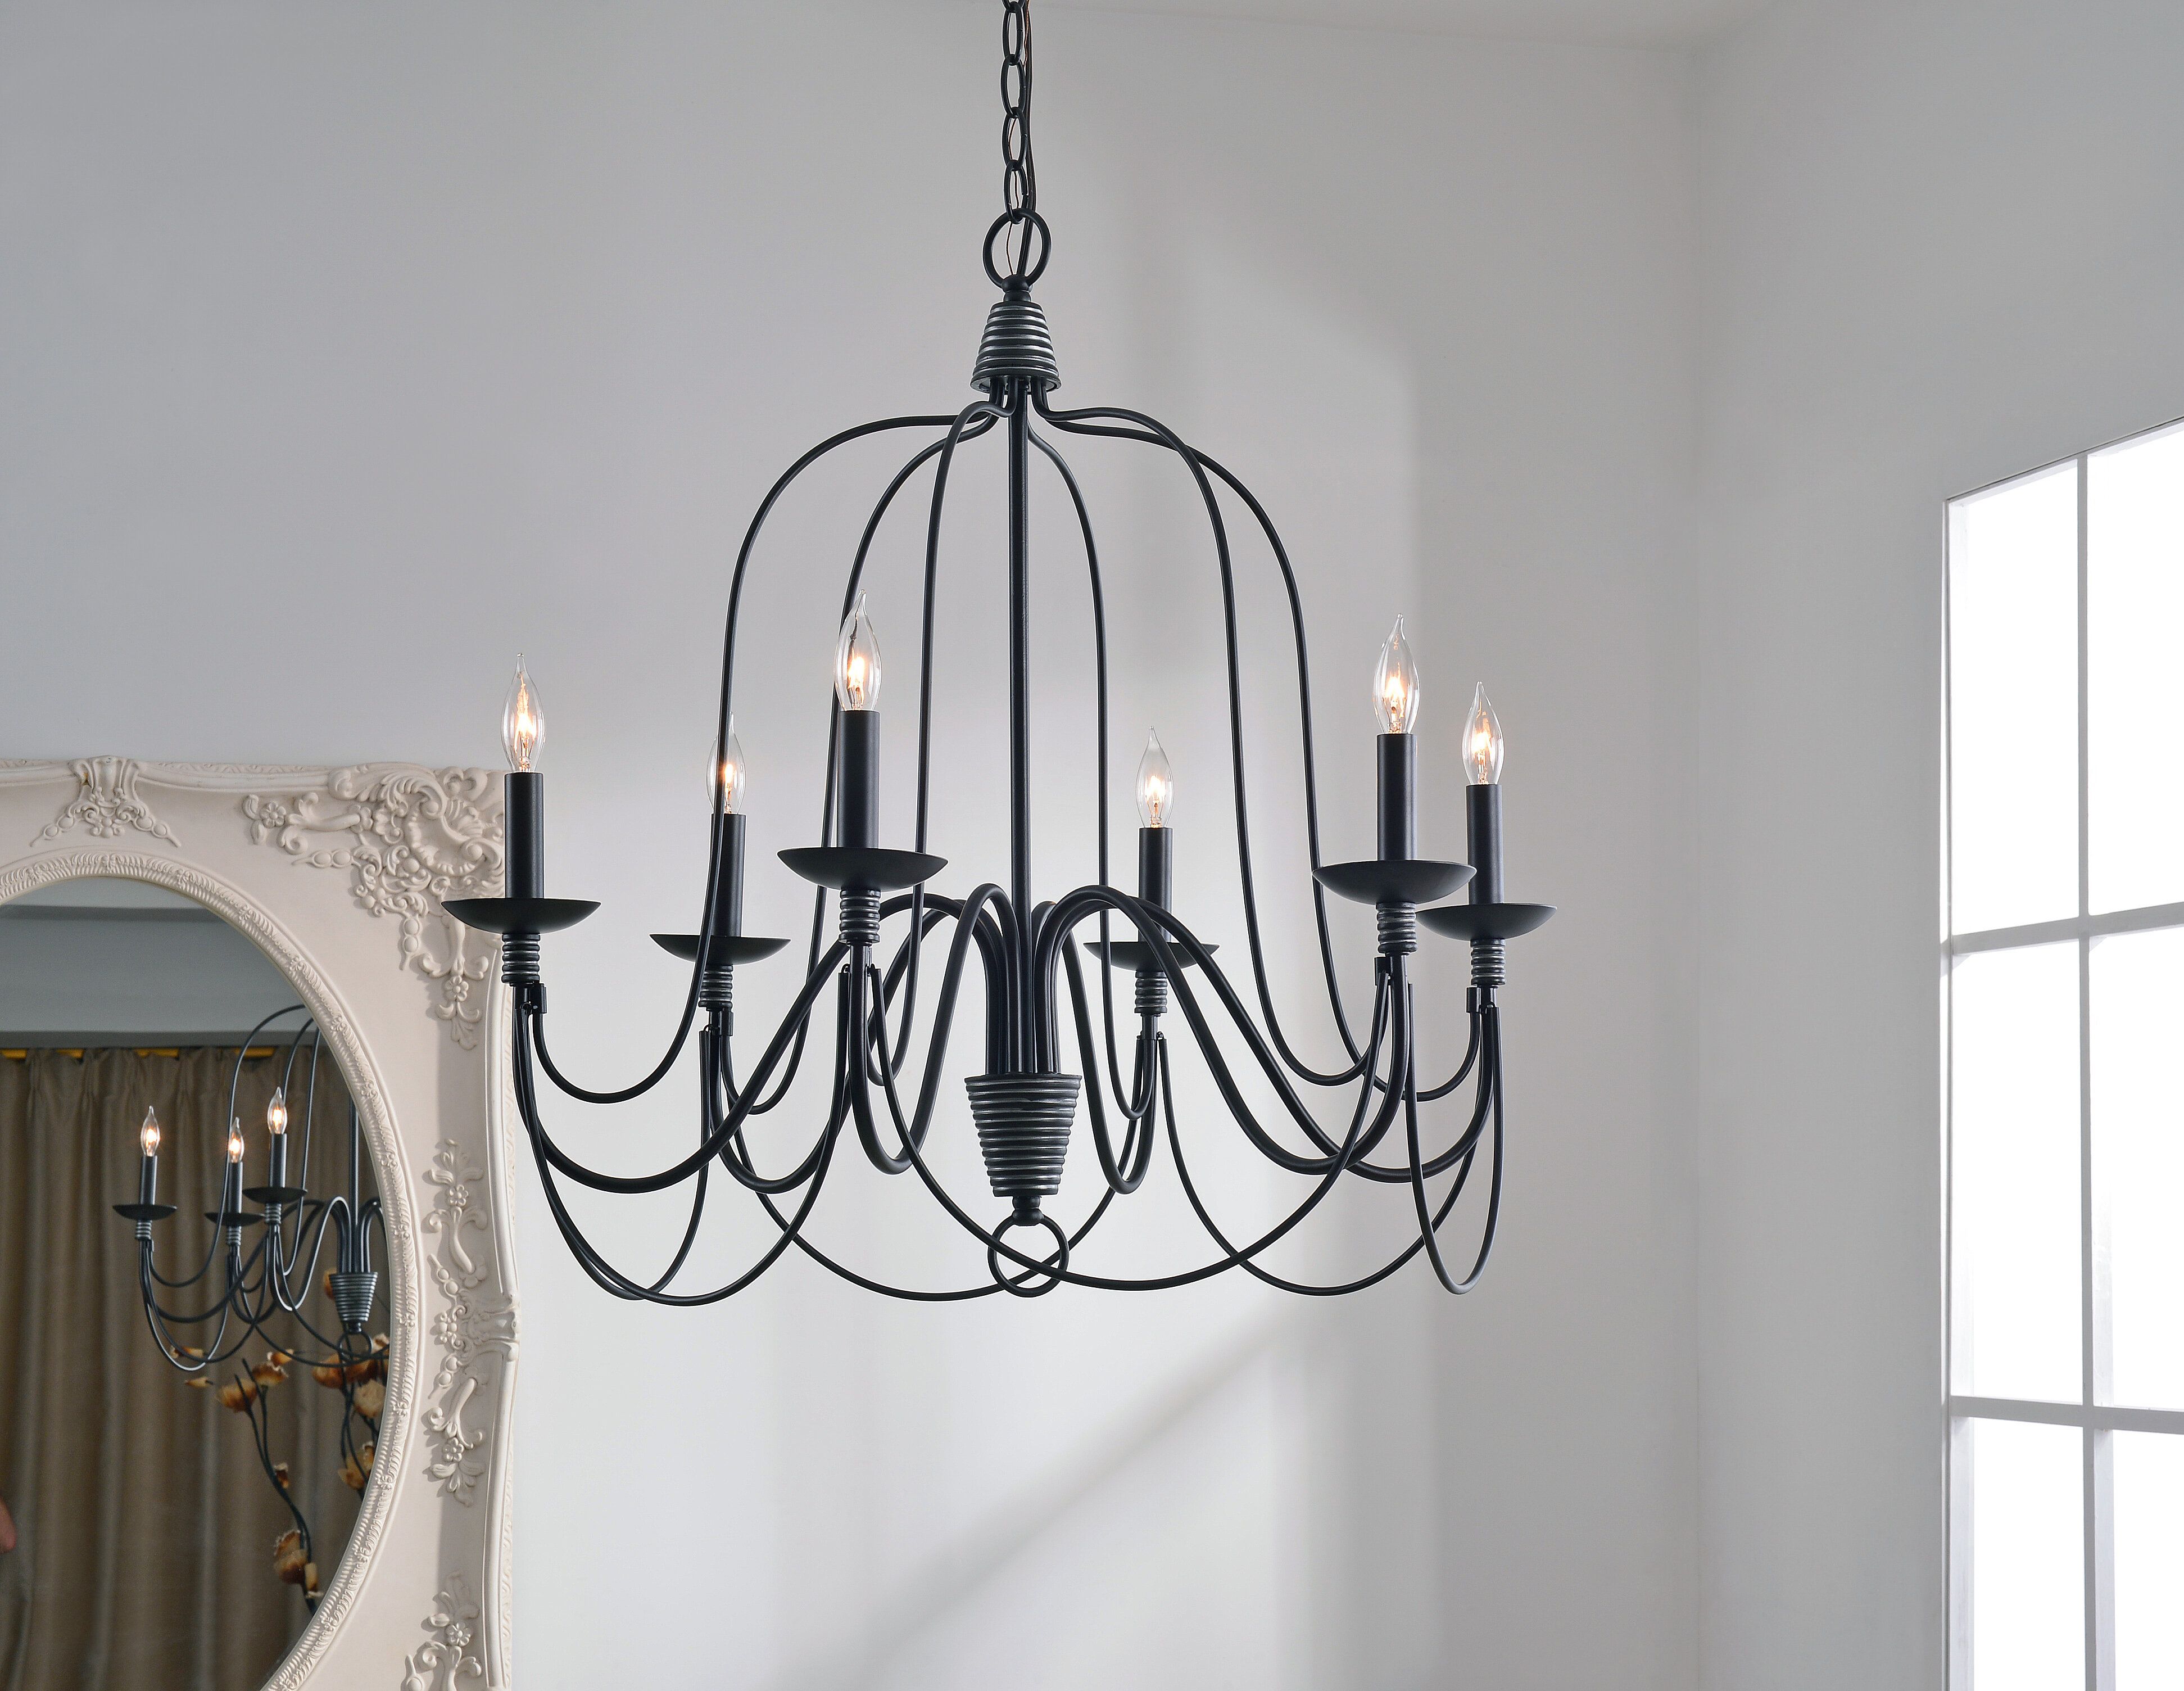 Watford 6 Light Candle Style Chandelier In Perseus 6 Light Candle Style Chandeliers (View 8 of 30)